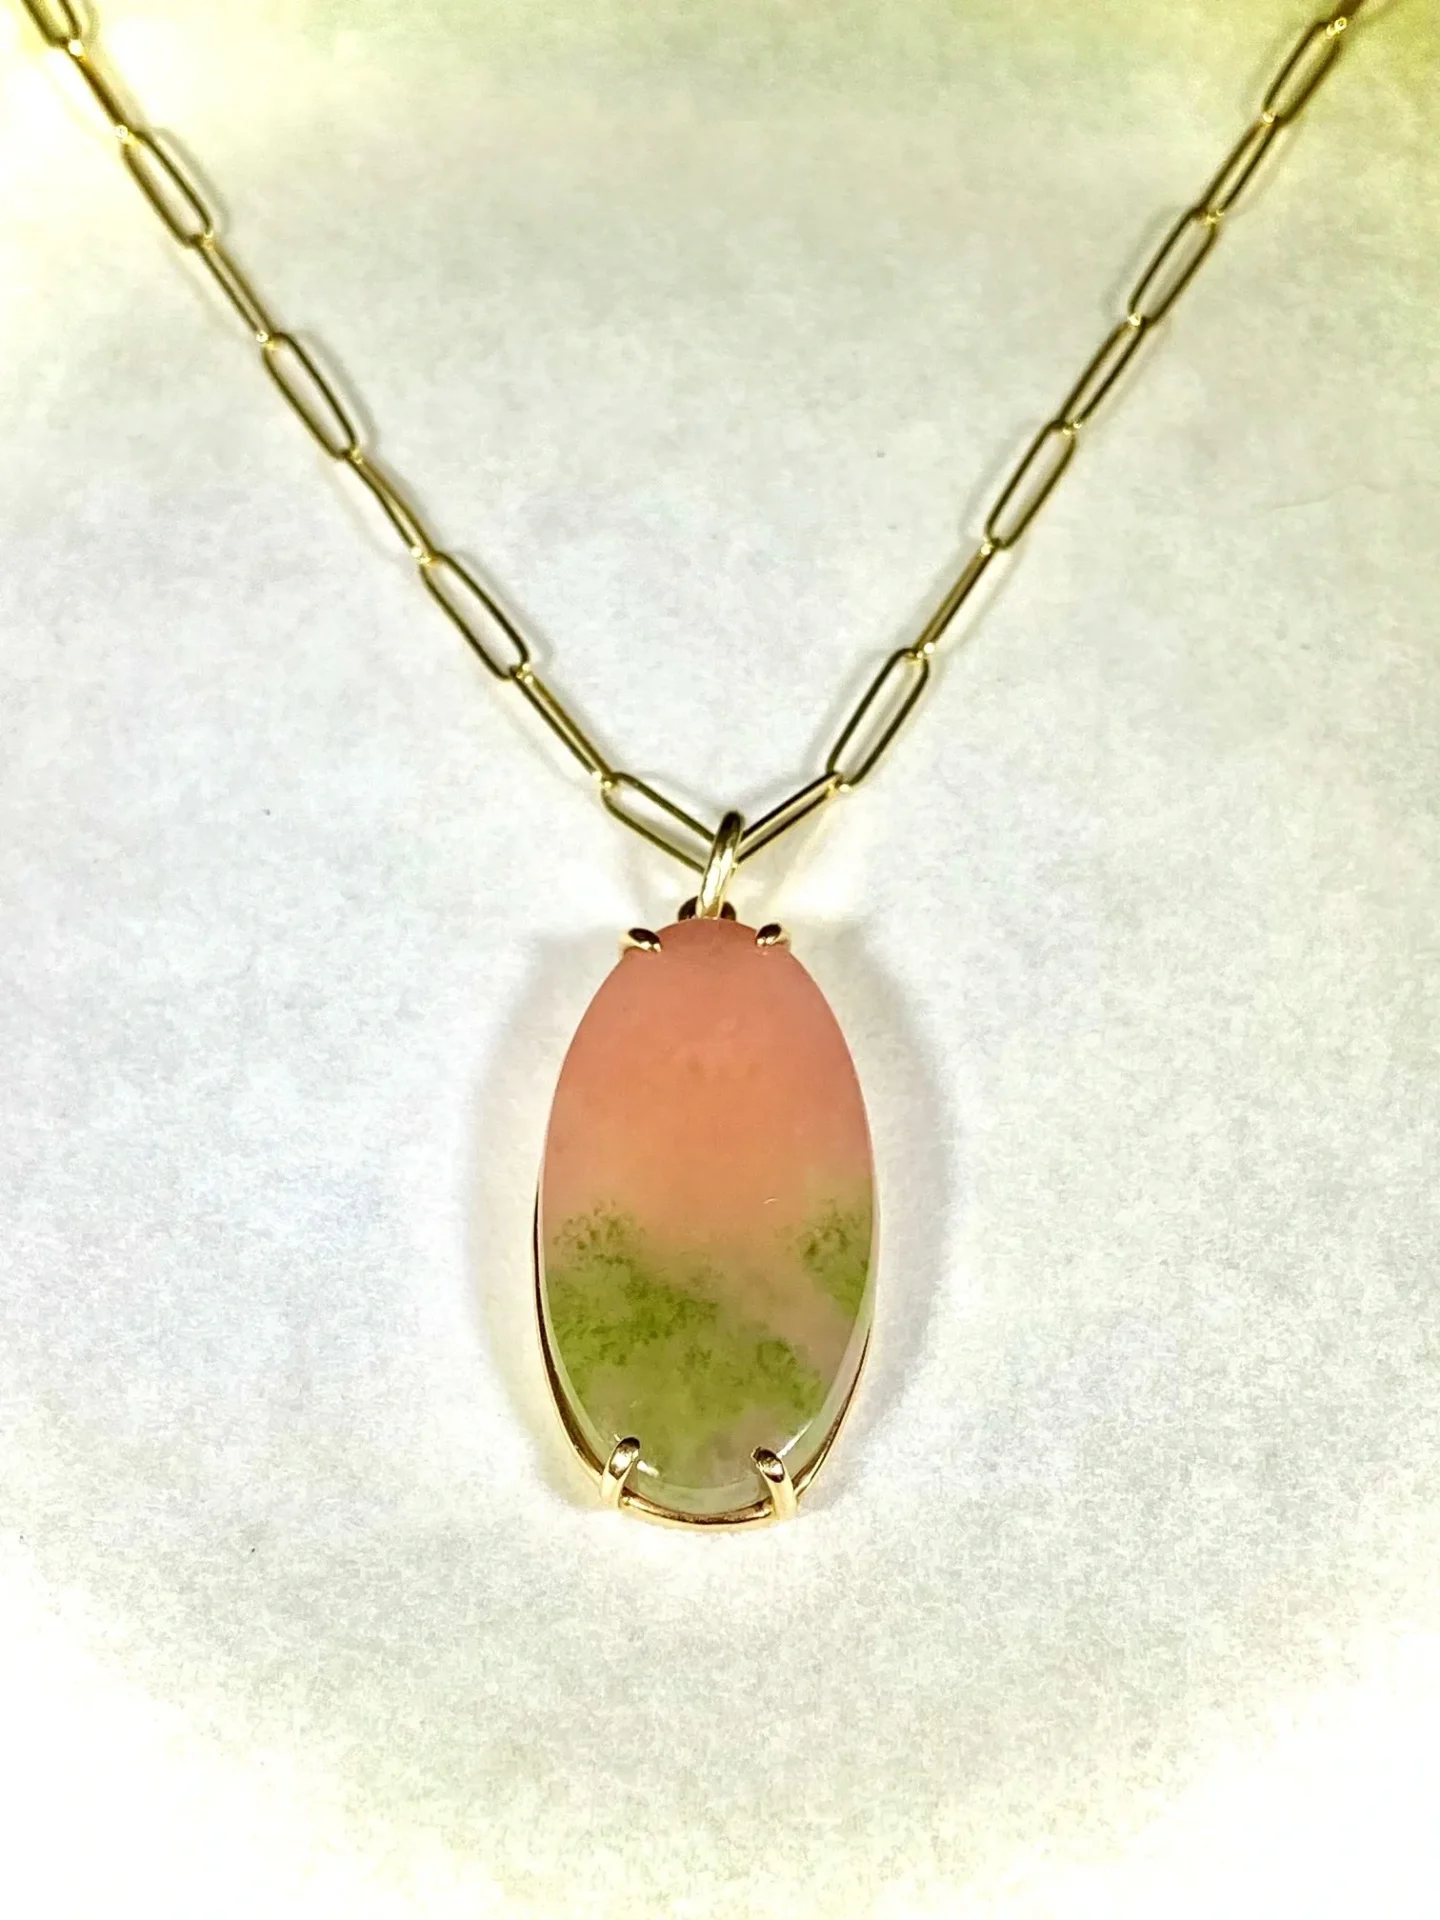 A necklace with a pink and green stone on it